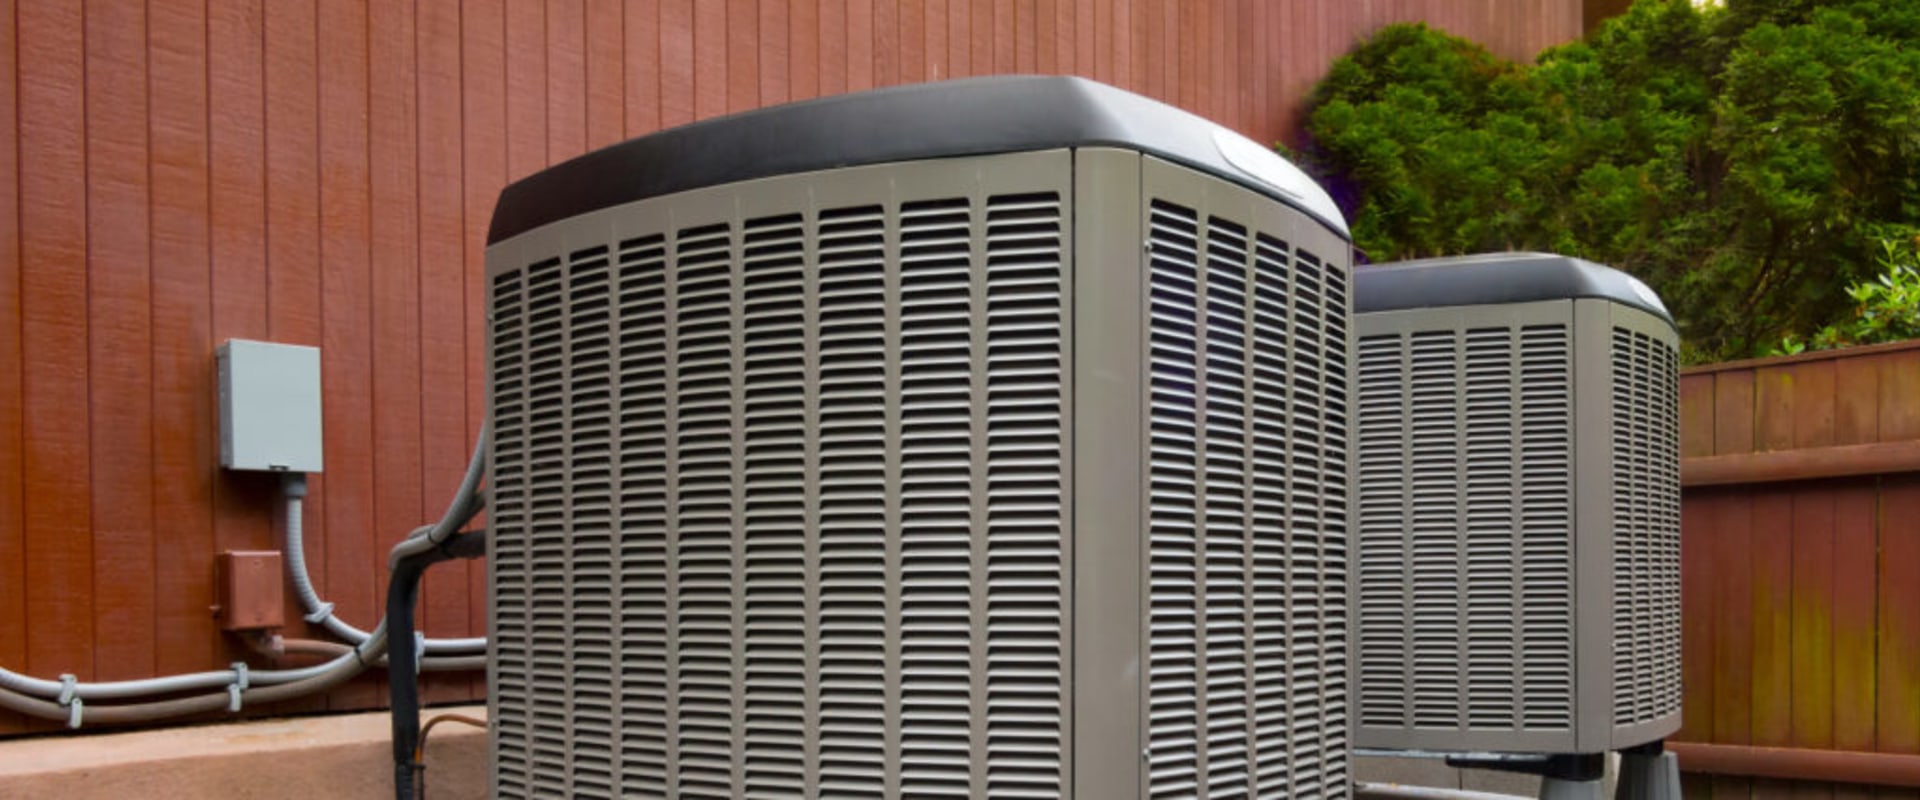 What is the most expensive part of an hvac system?